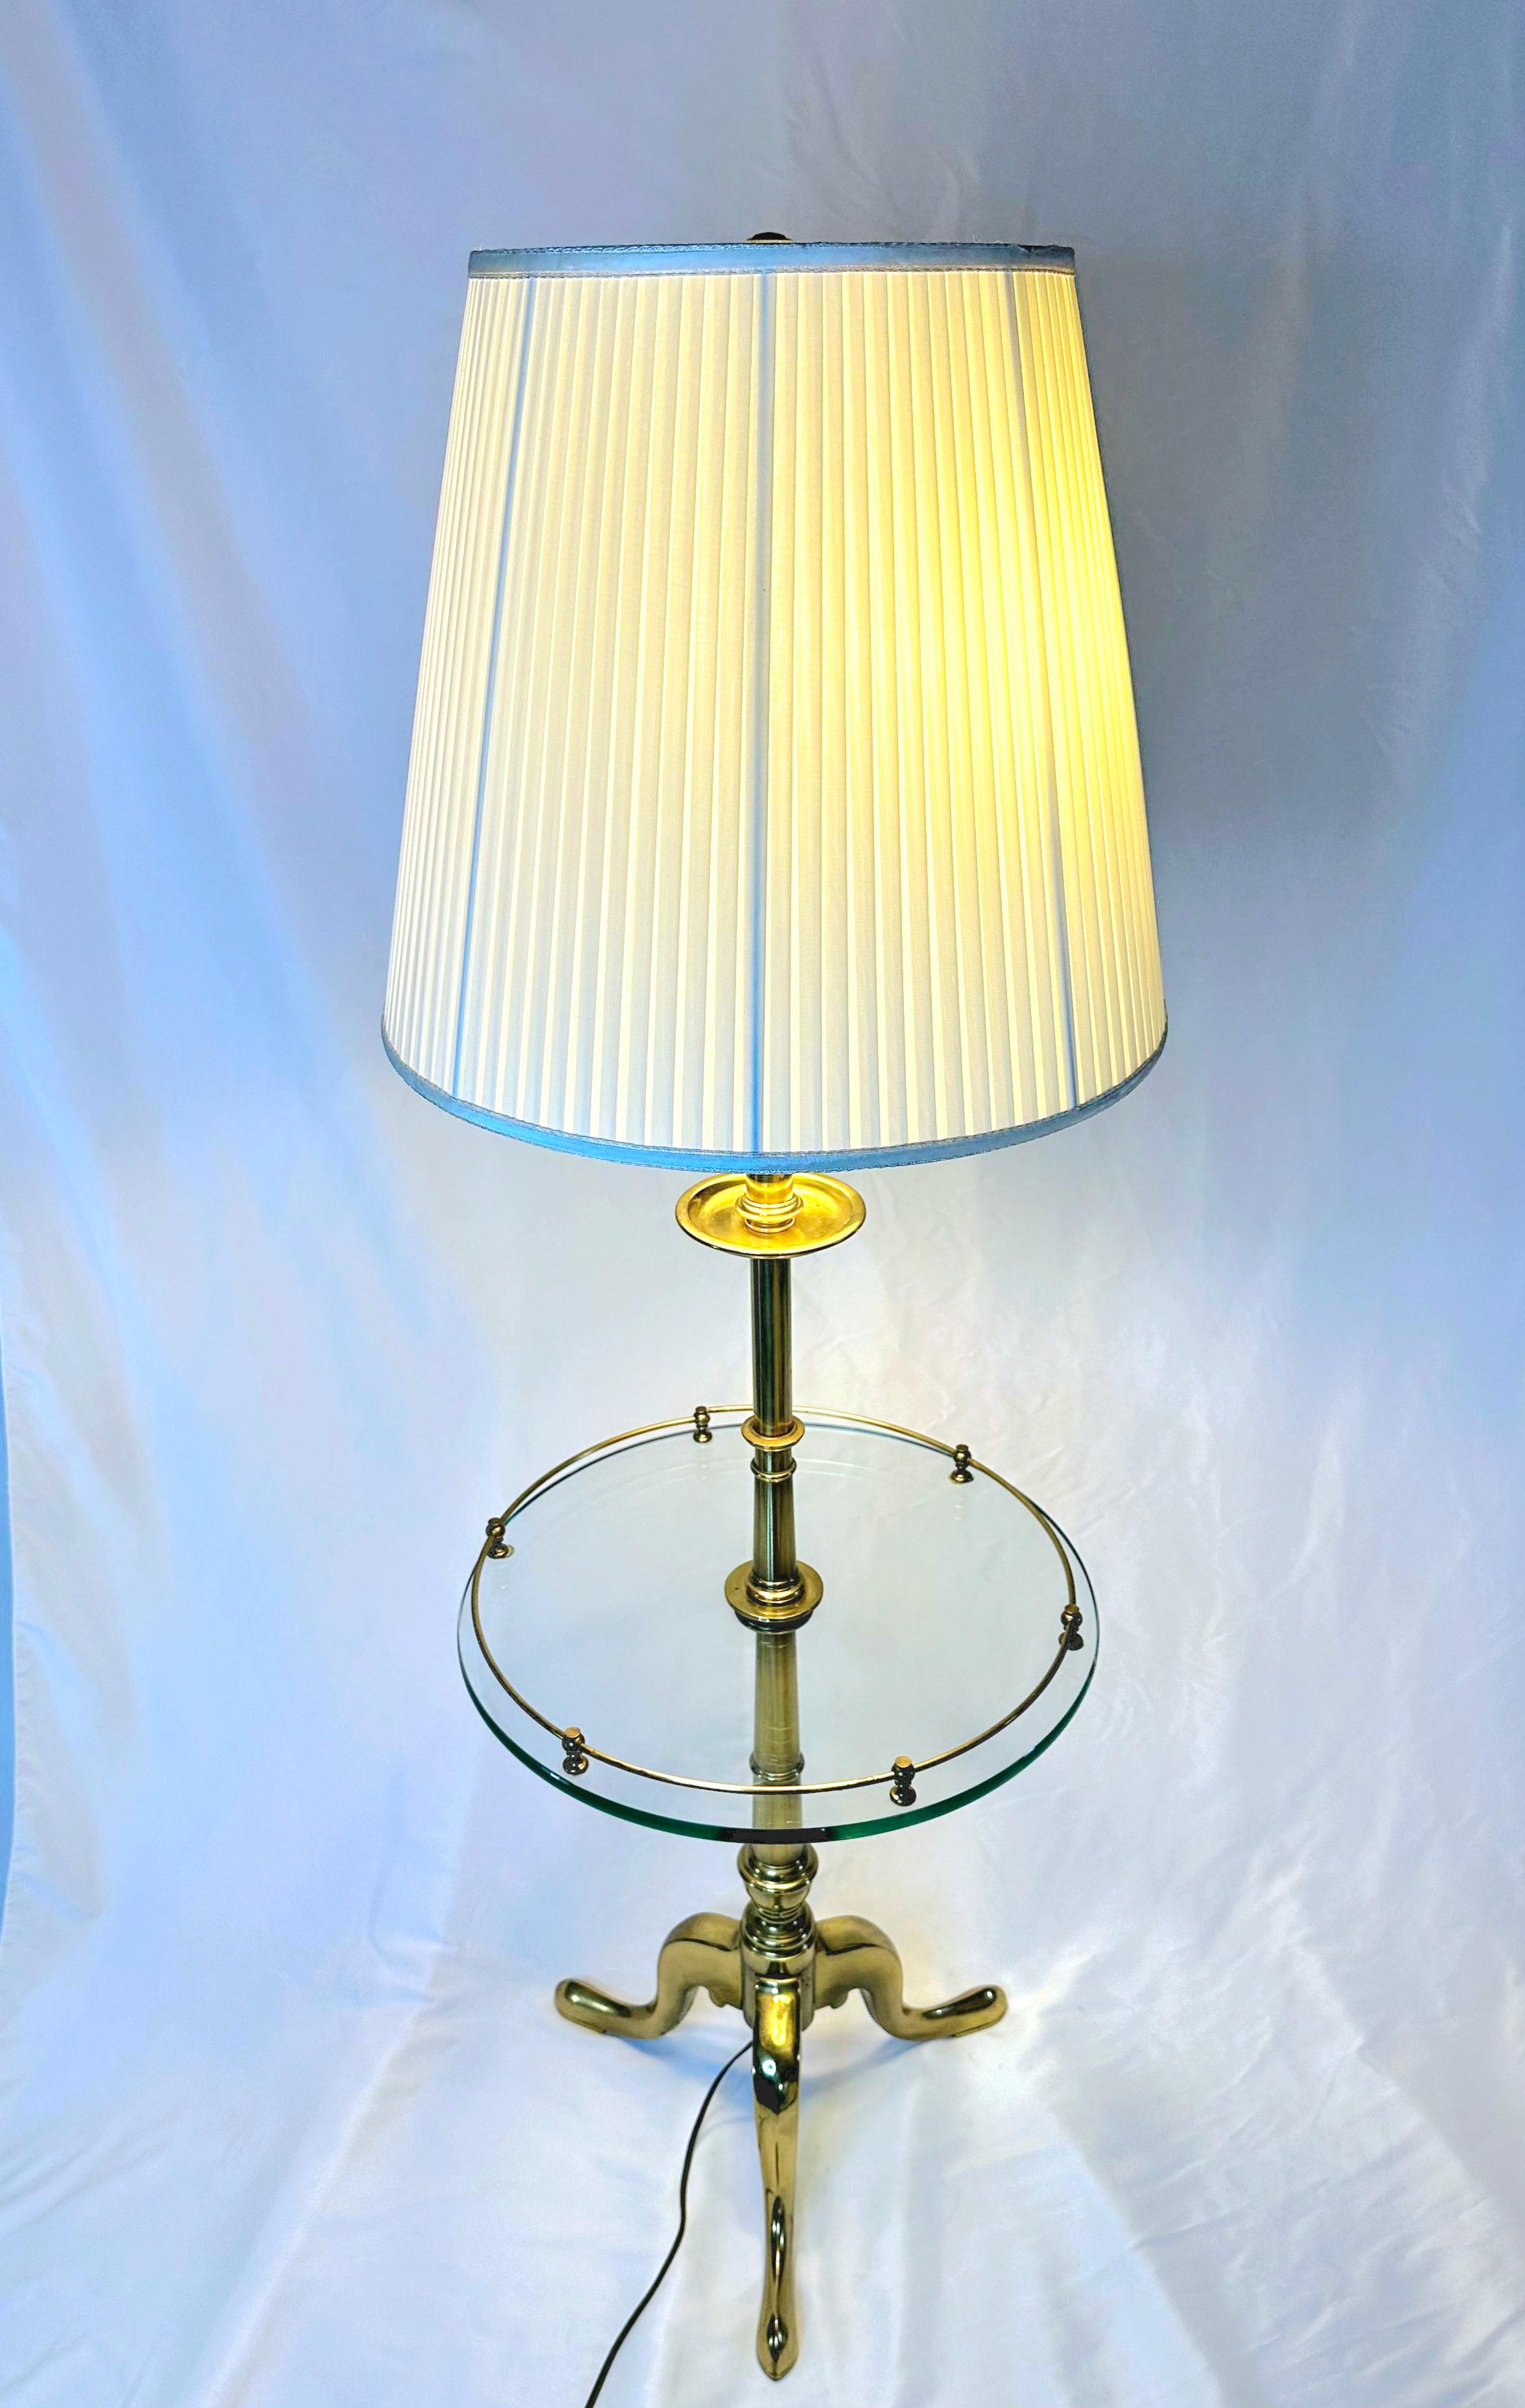 French Provincial Stiffel Floor Lamp With Glass Table and tripod legs 23